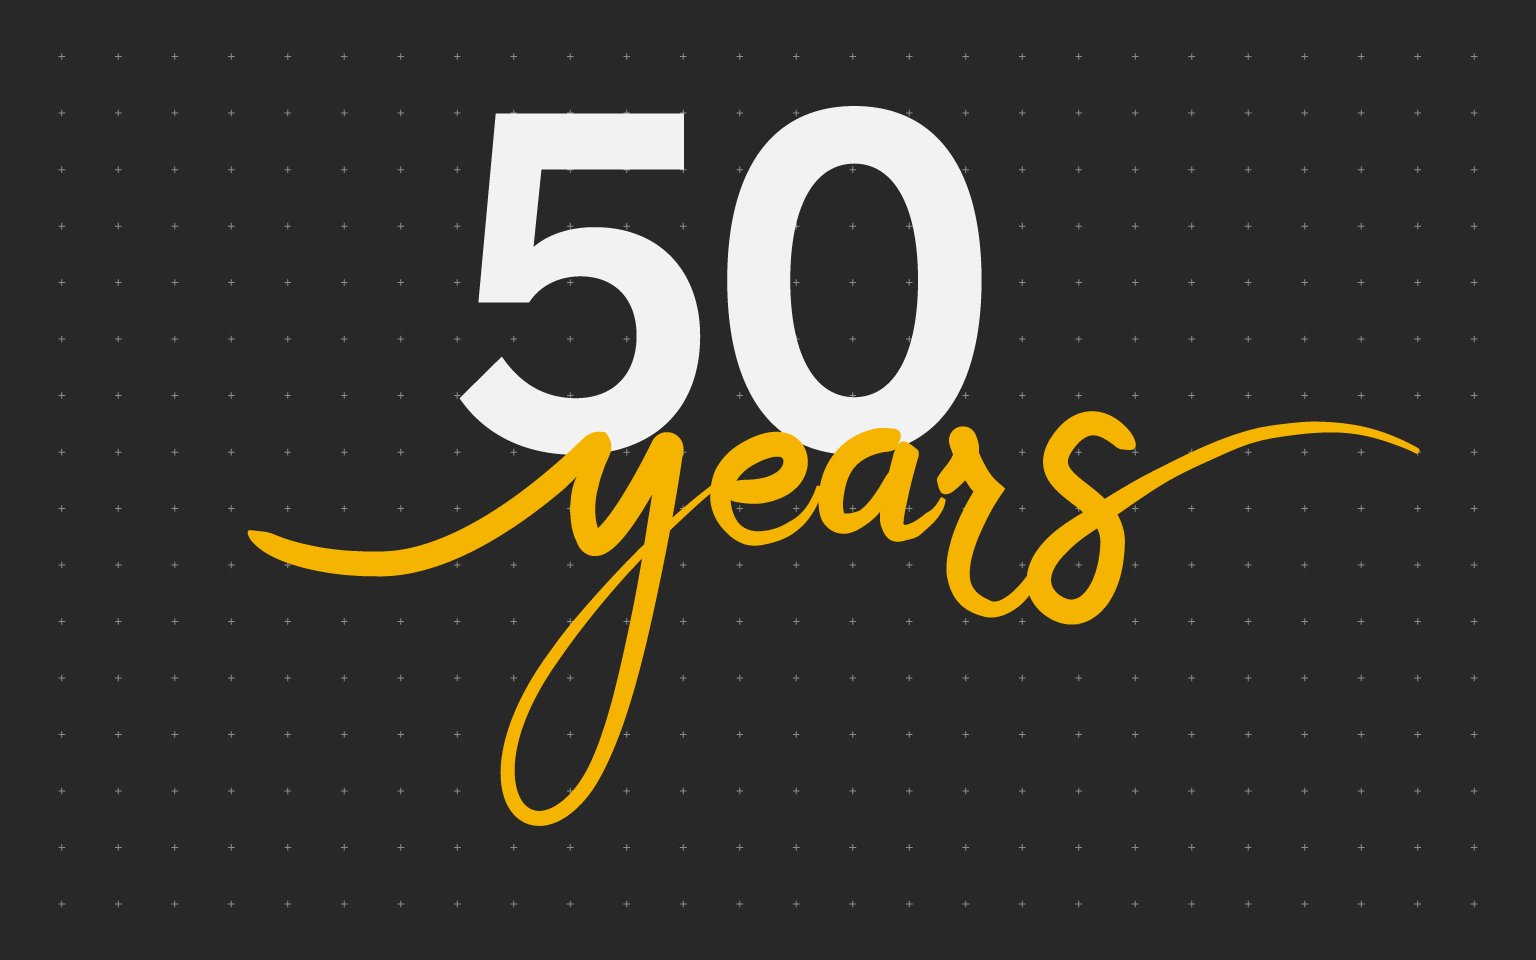 Celebrating 50 years in proud partnership with American businesses